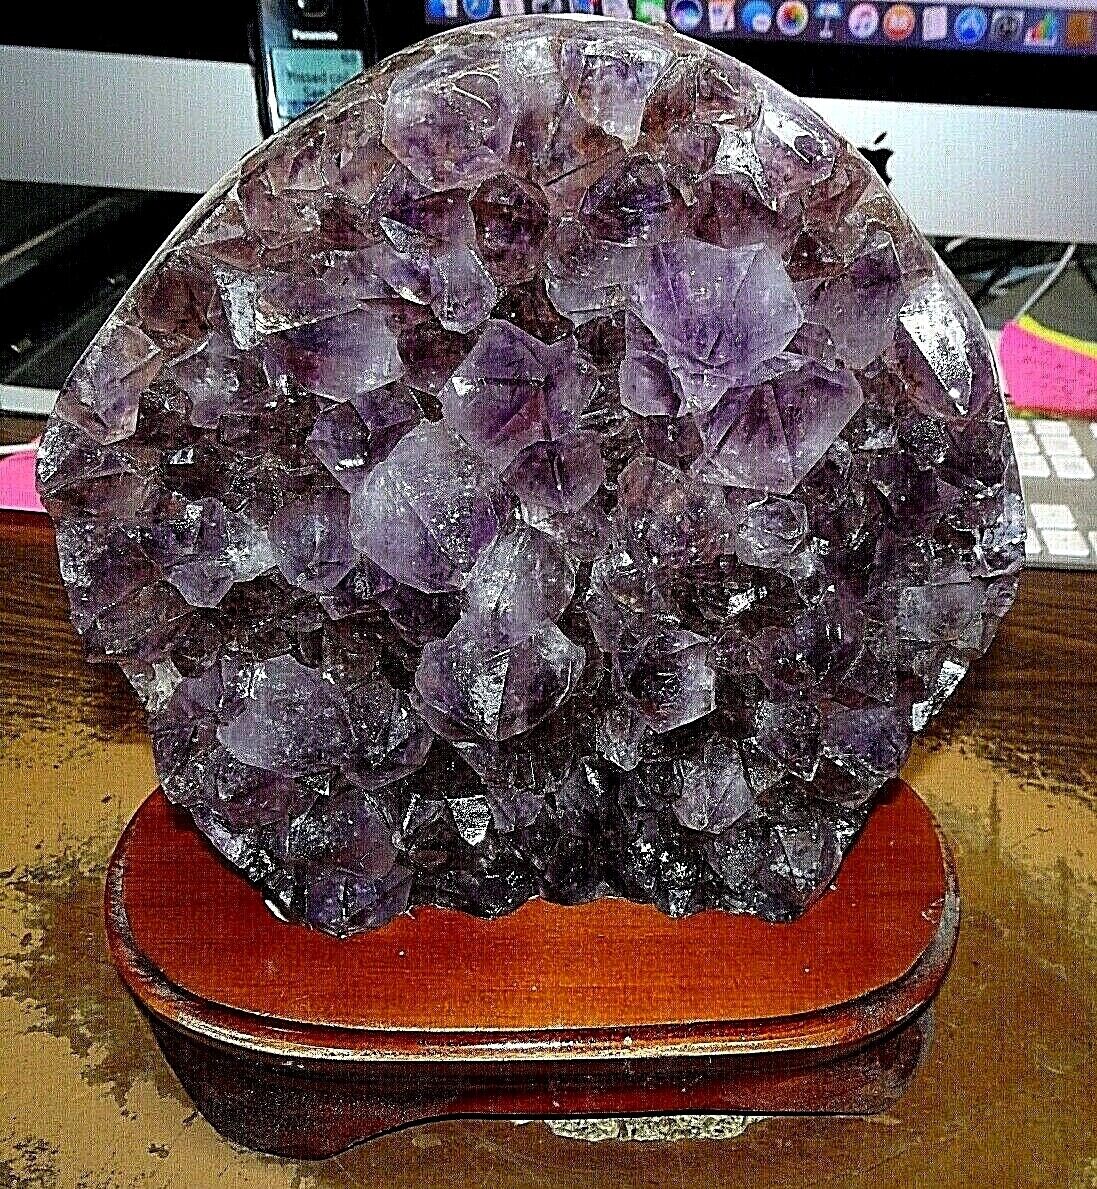 LG. AMETHYST CRYSTAL CLUSTER  CATHEDRAL GEODE  BRAZIL  WOOD  STAND 